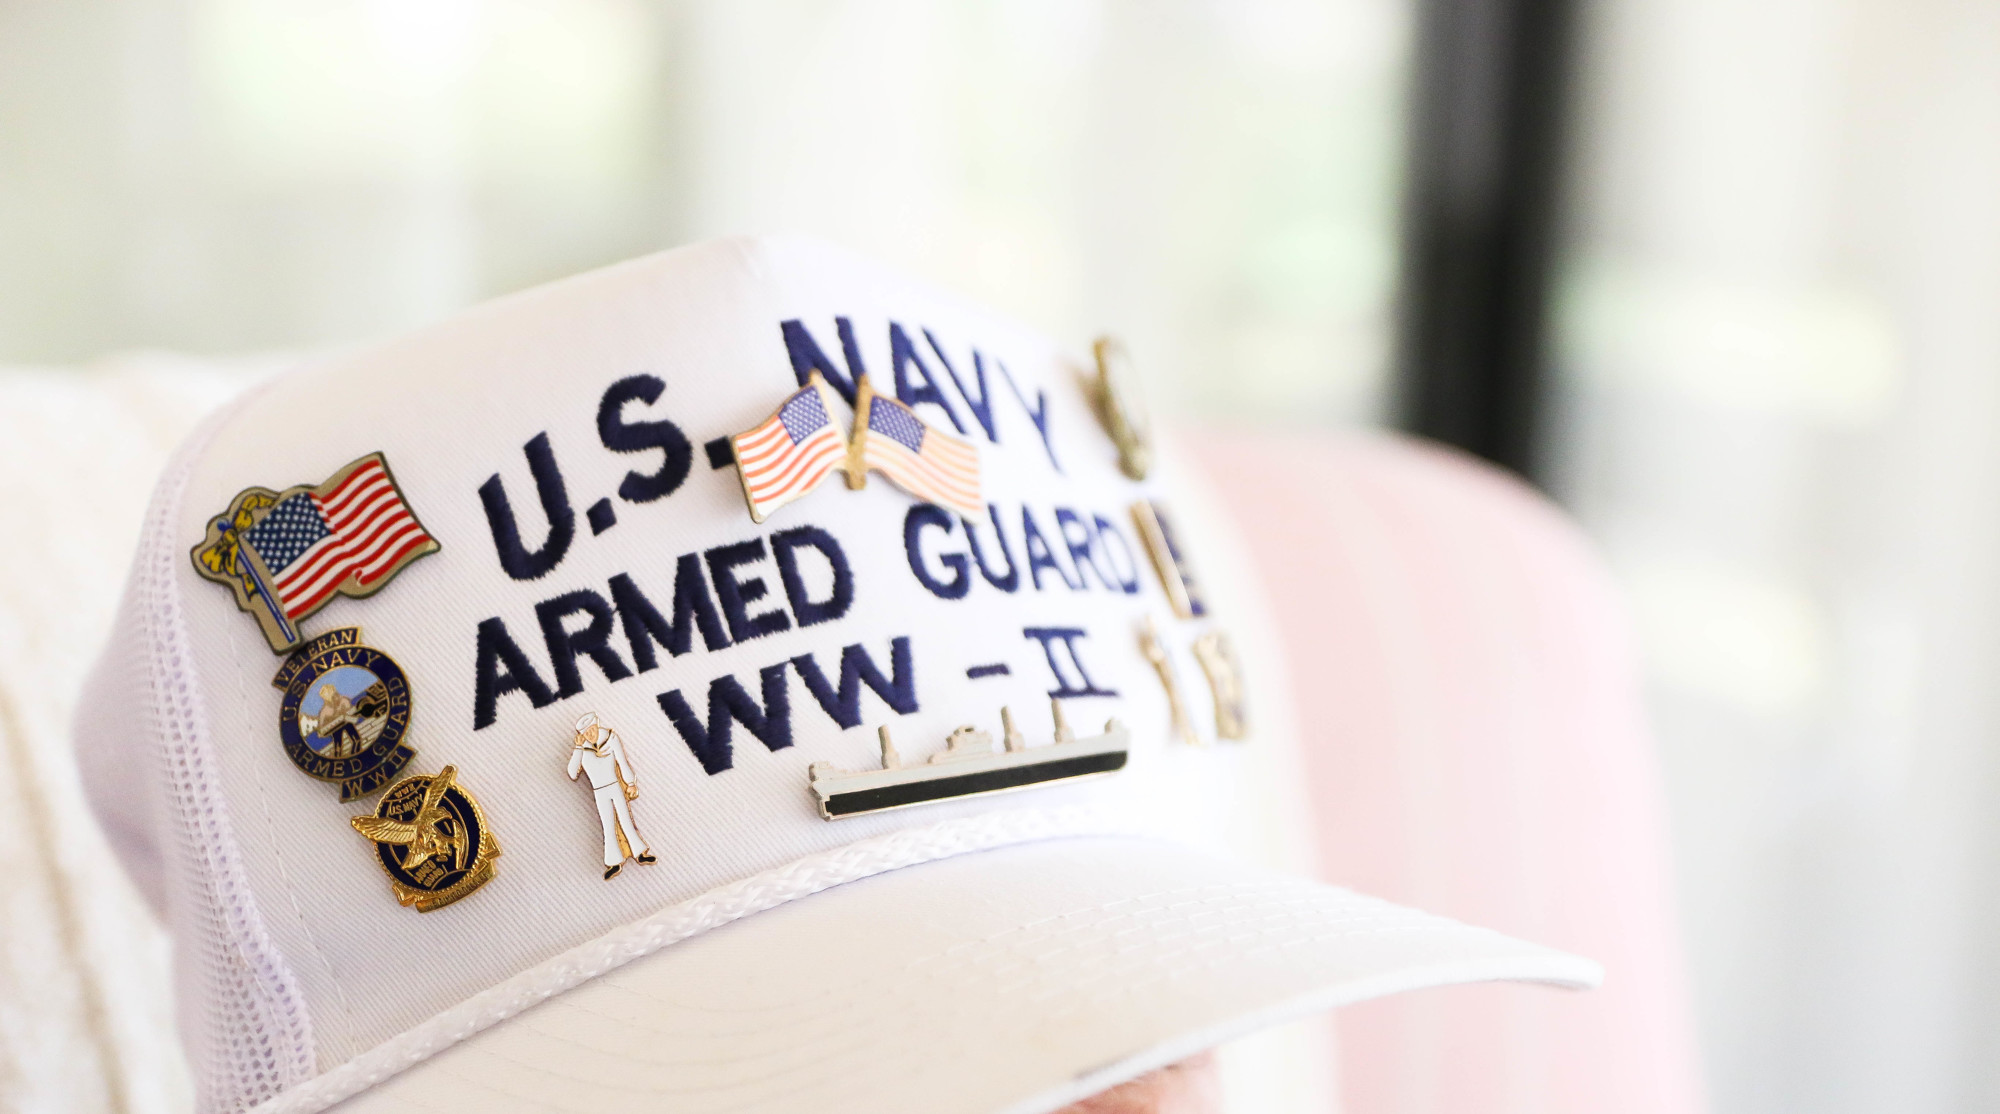 Frank Hedrick's hat is decorated with military honors. Photo by Paige Wilson